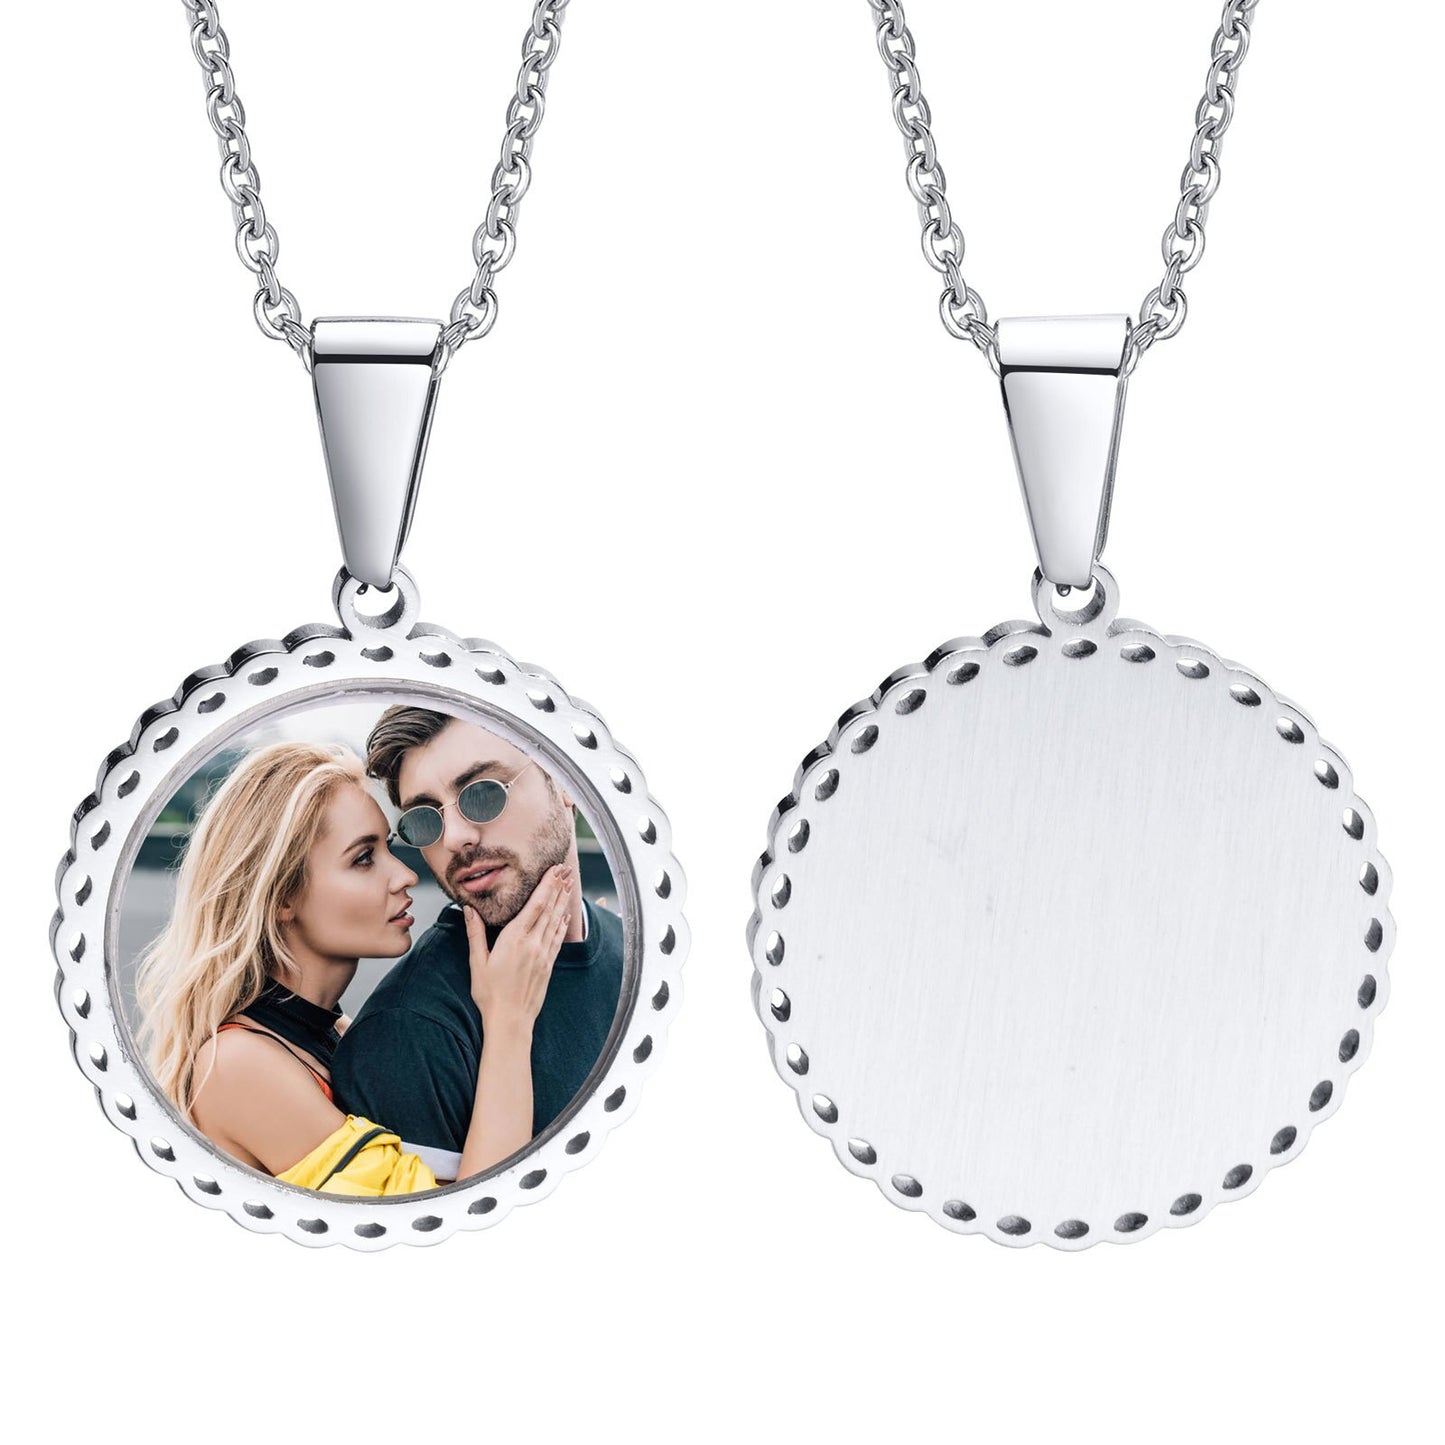 Vnox Free Custom Photo Picture Necklaces for Women, Personalize Words Stainless Steel Pendant,Mothers or Lover Gifts Jewelry